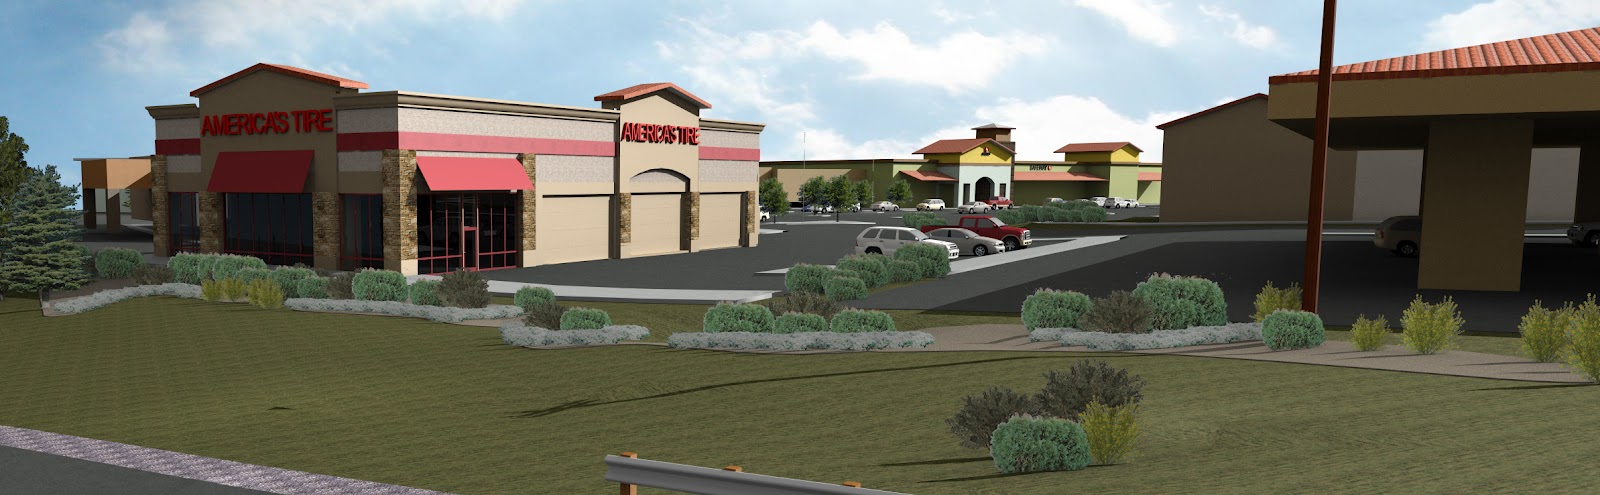 Shopping Center Proposed New Tenant 02 LARGE.jpg